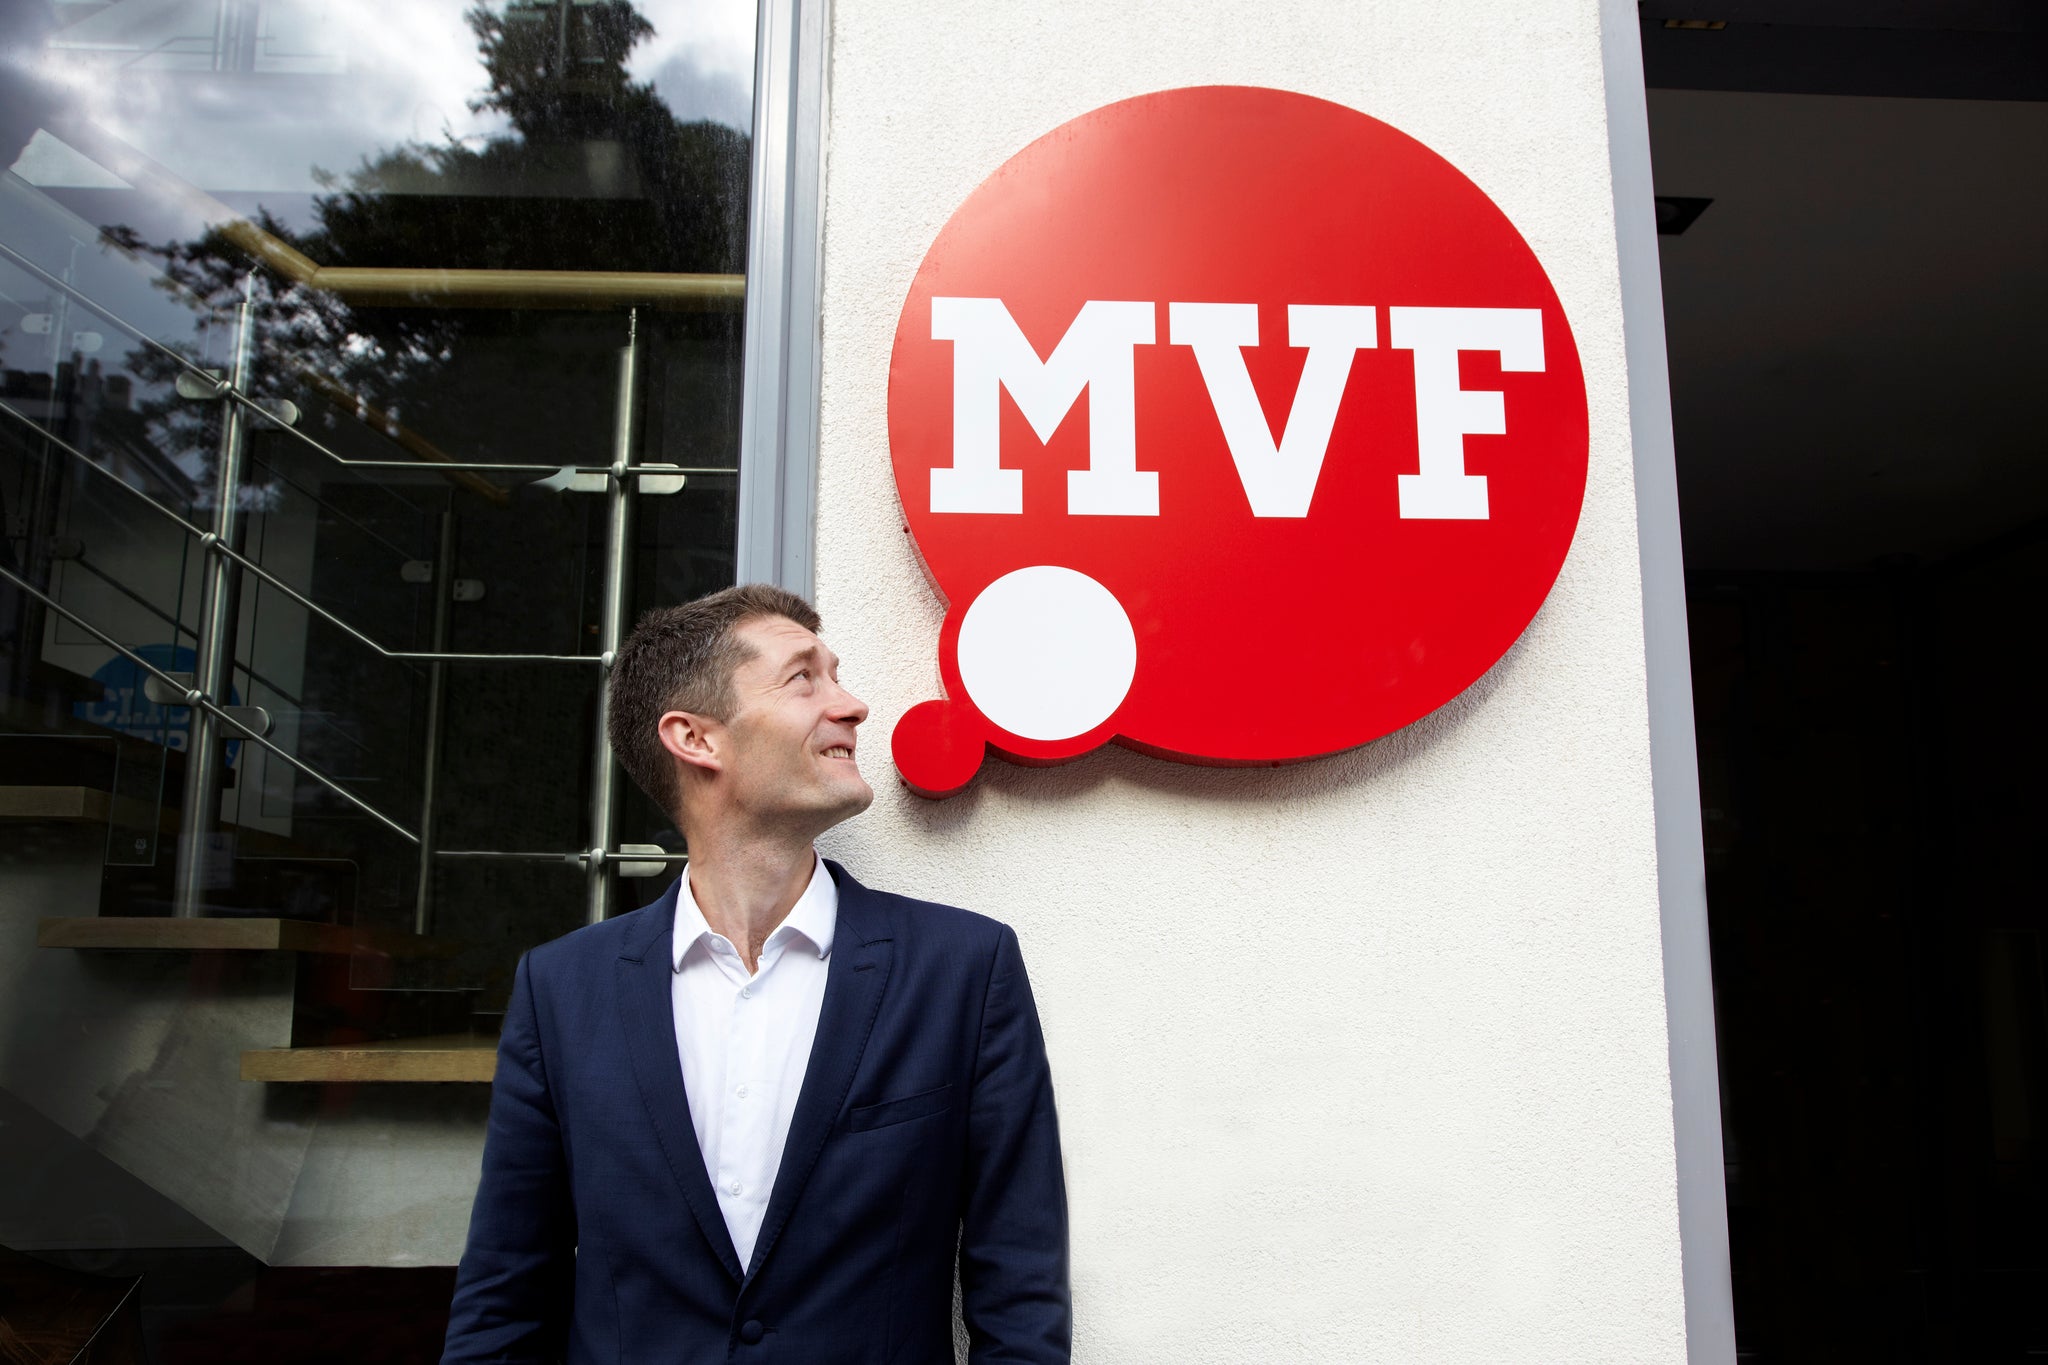 MVF co-founder and chief executive Titus Sharpe